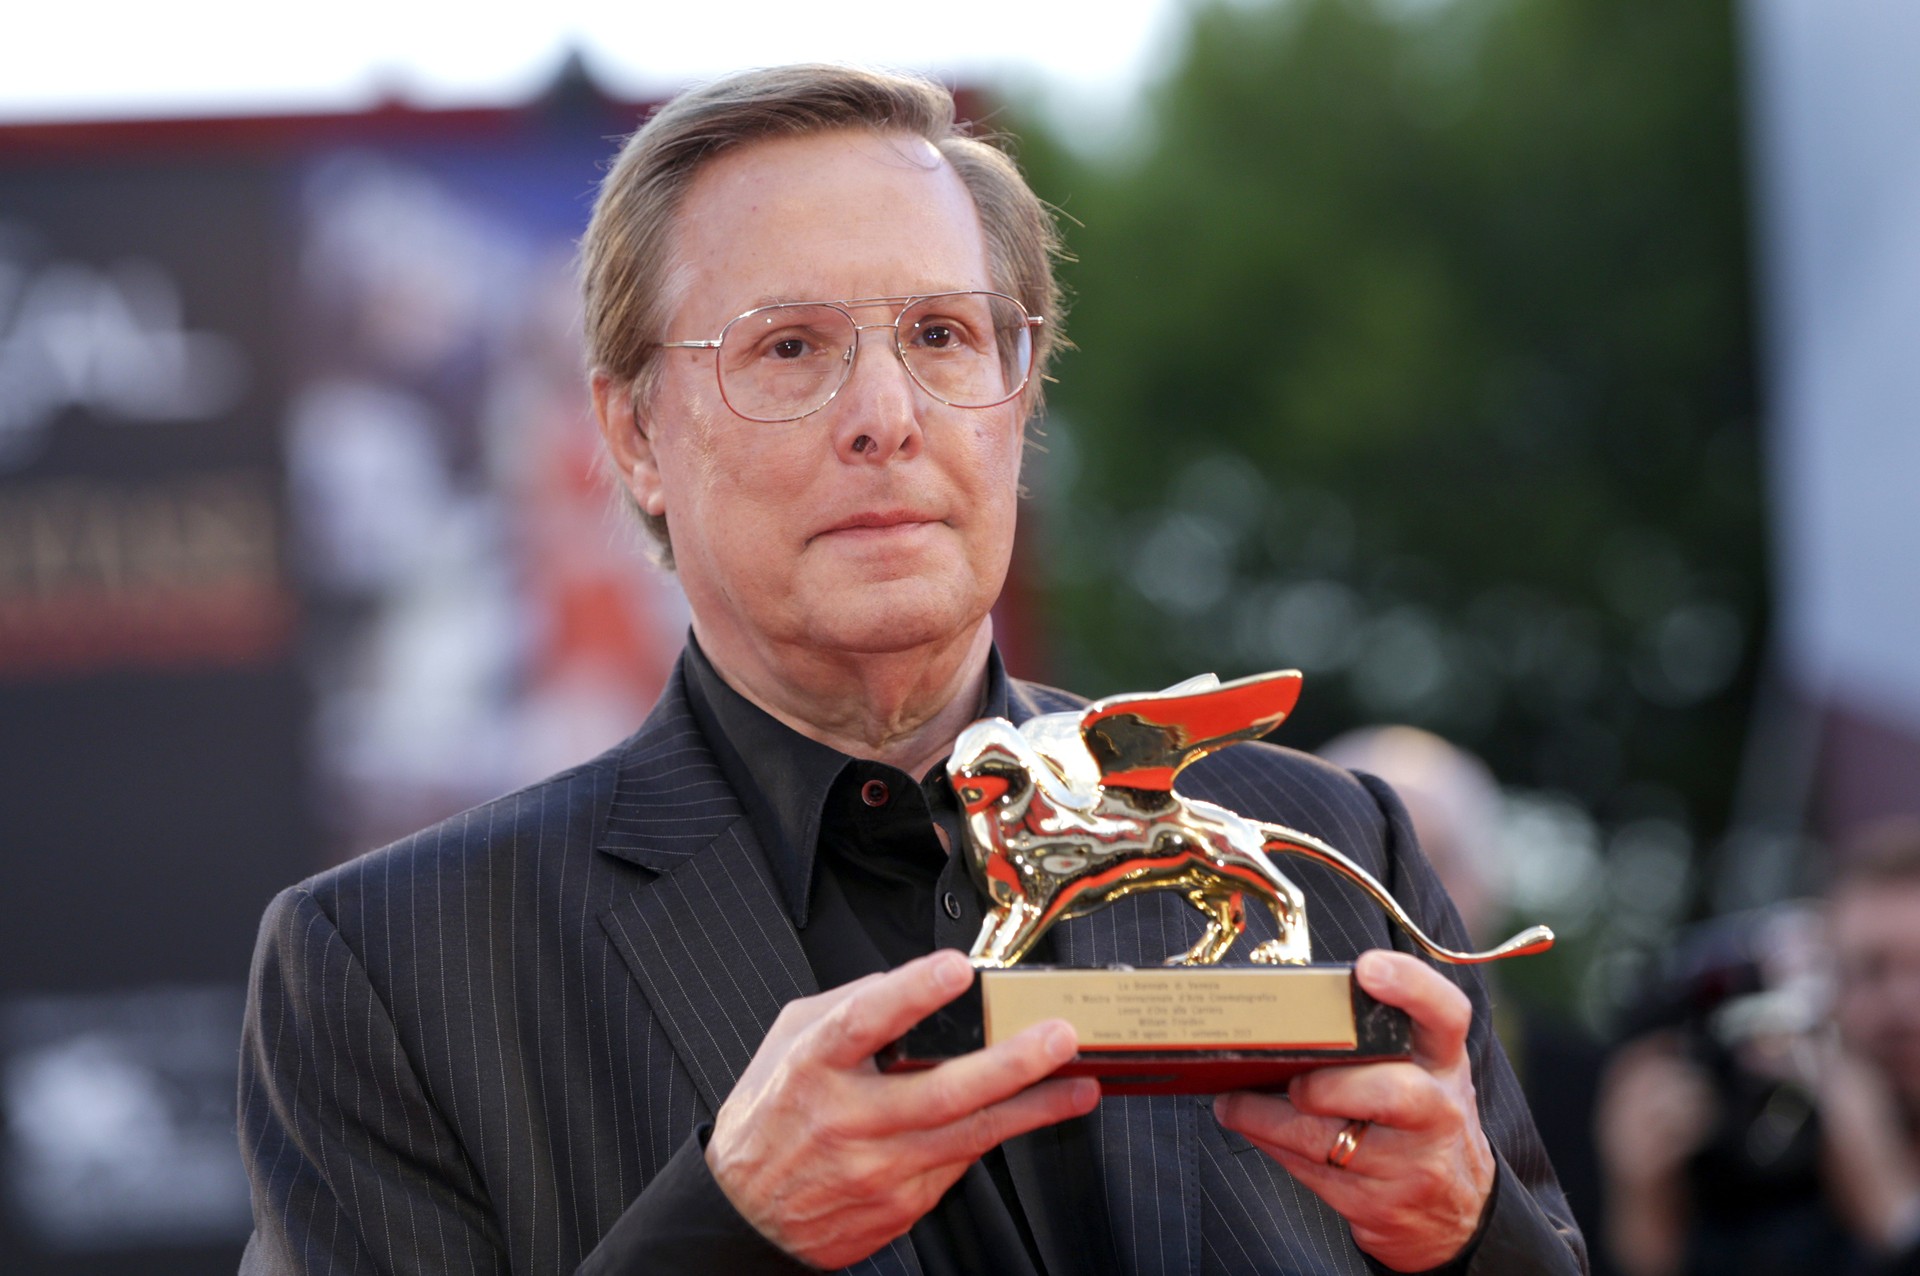 Friedkin, who won the best director Oscar for The French Connection, died on Monday.